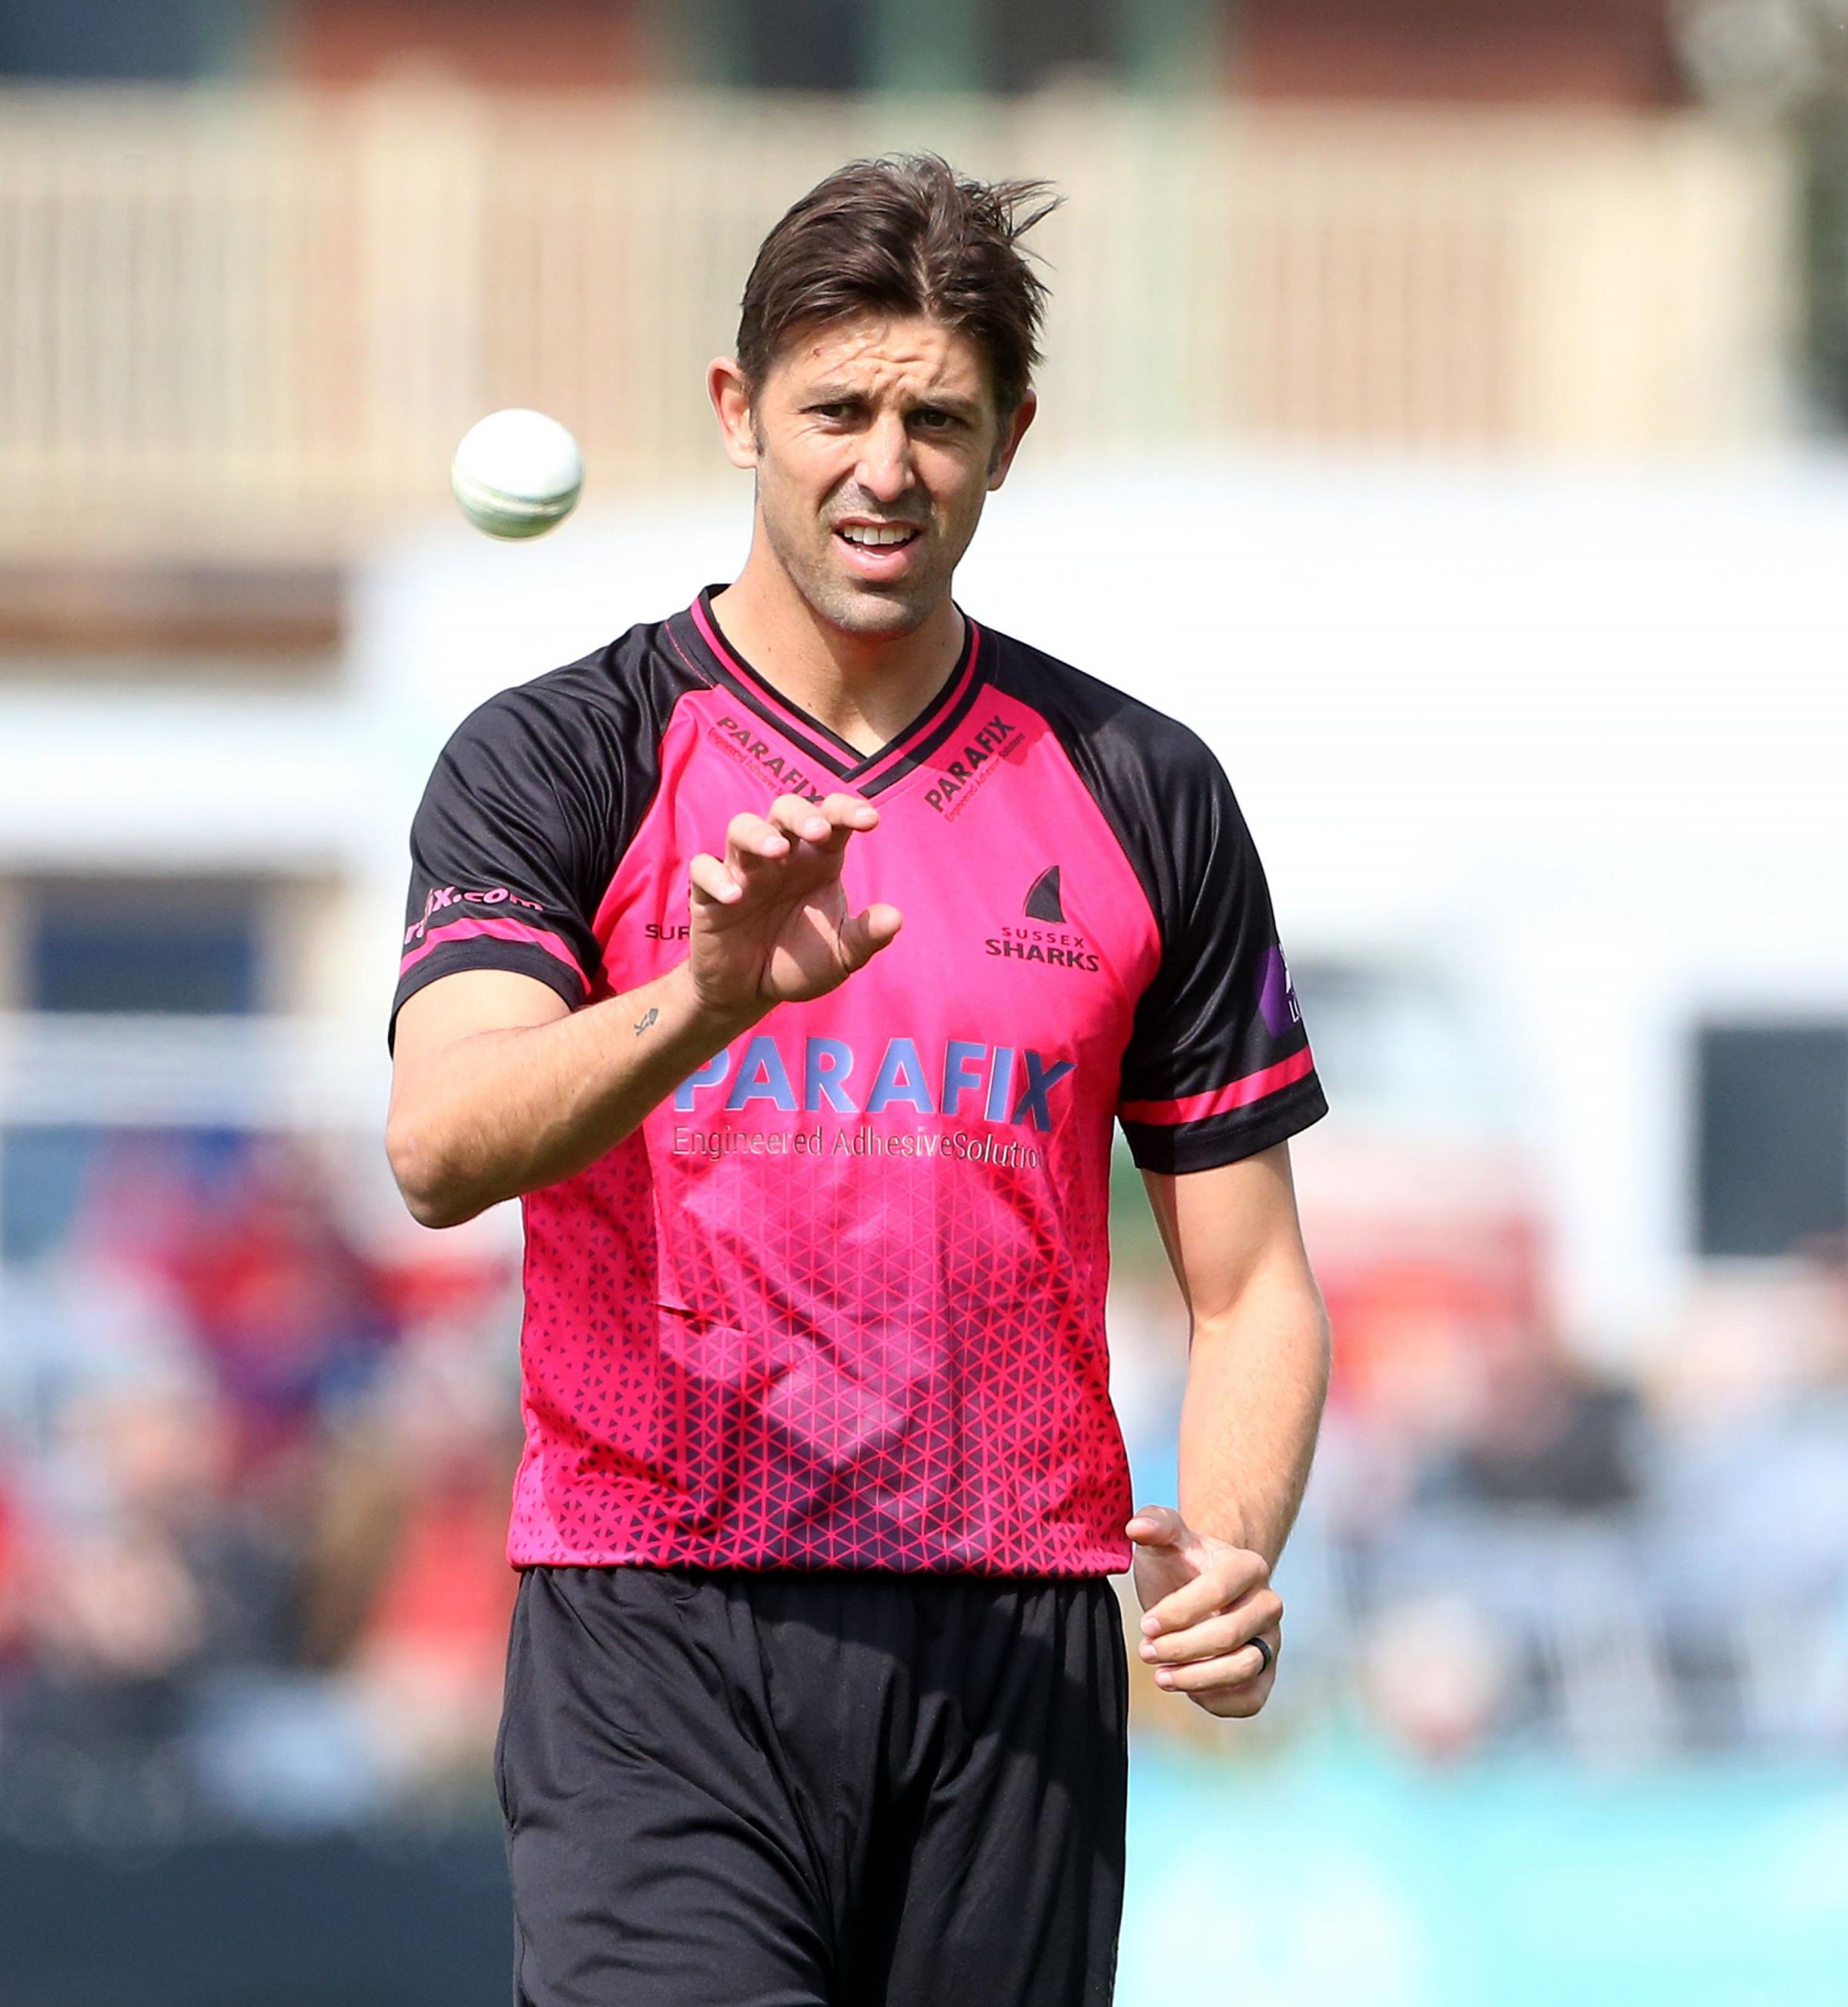 We let ourselves down admits Sussex all-rounder - The Argus